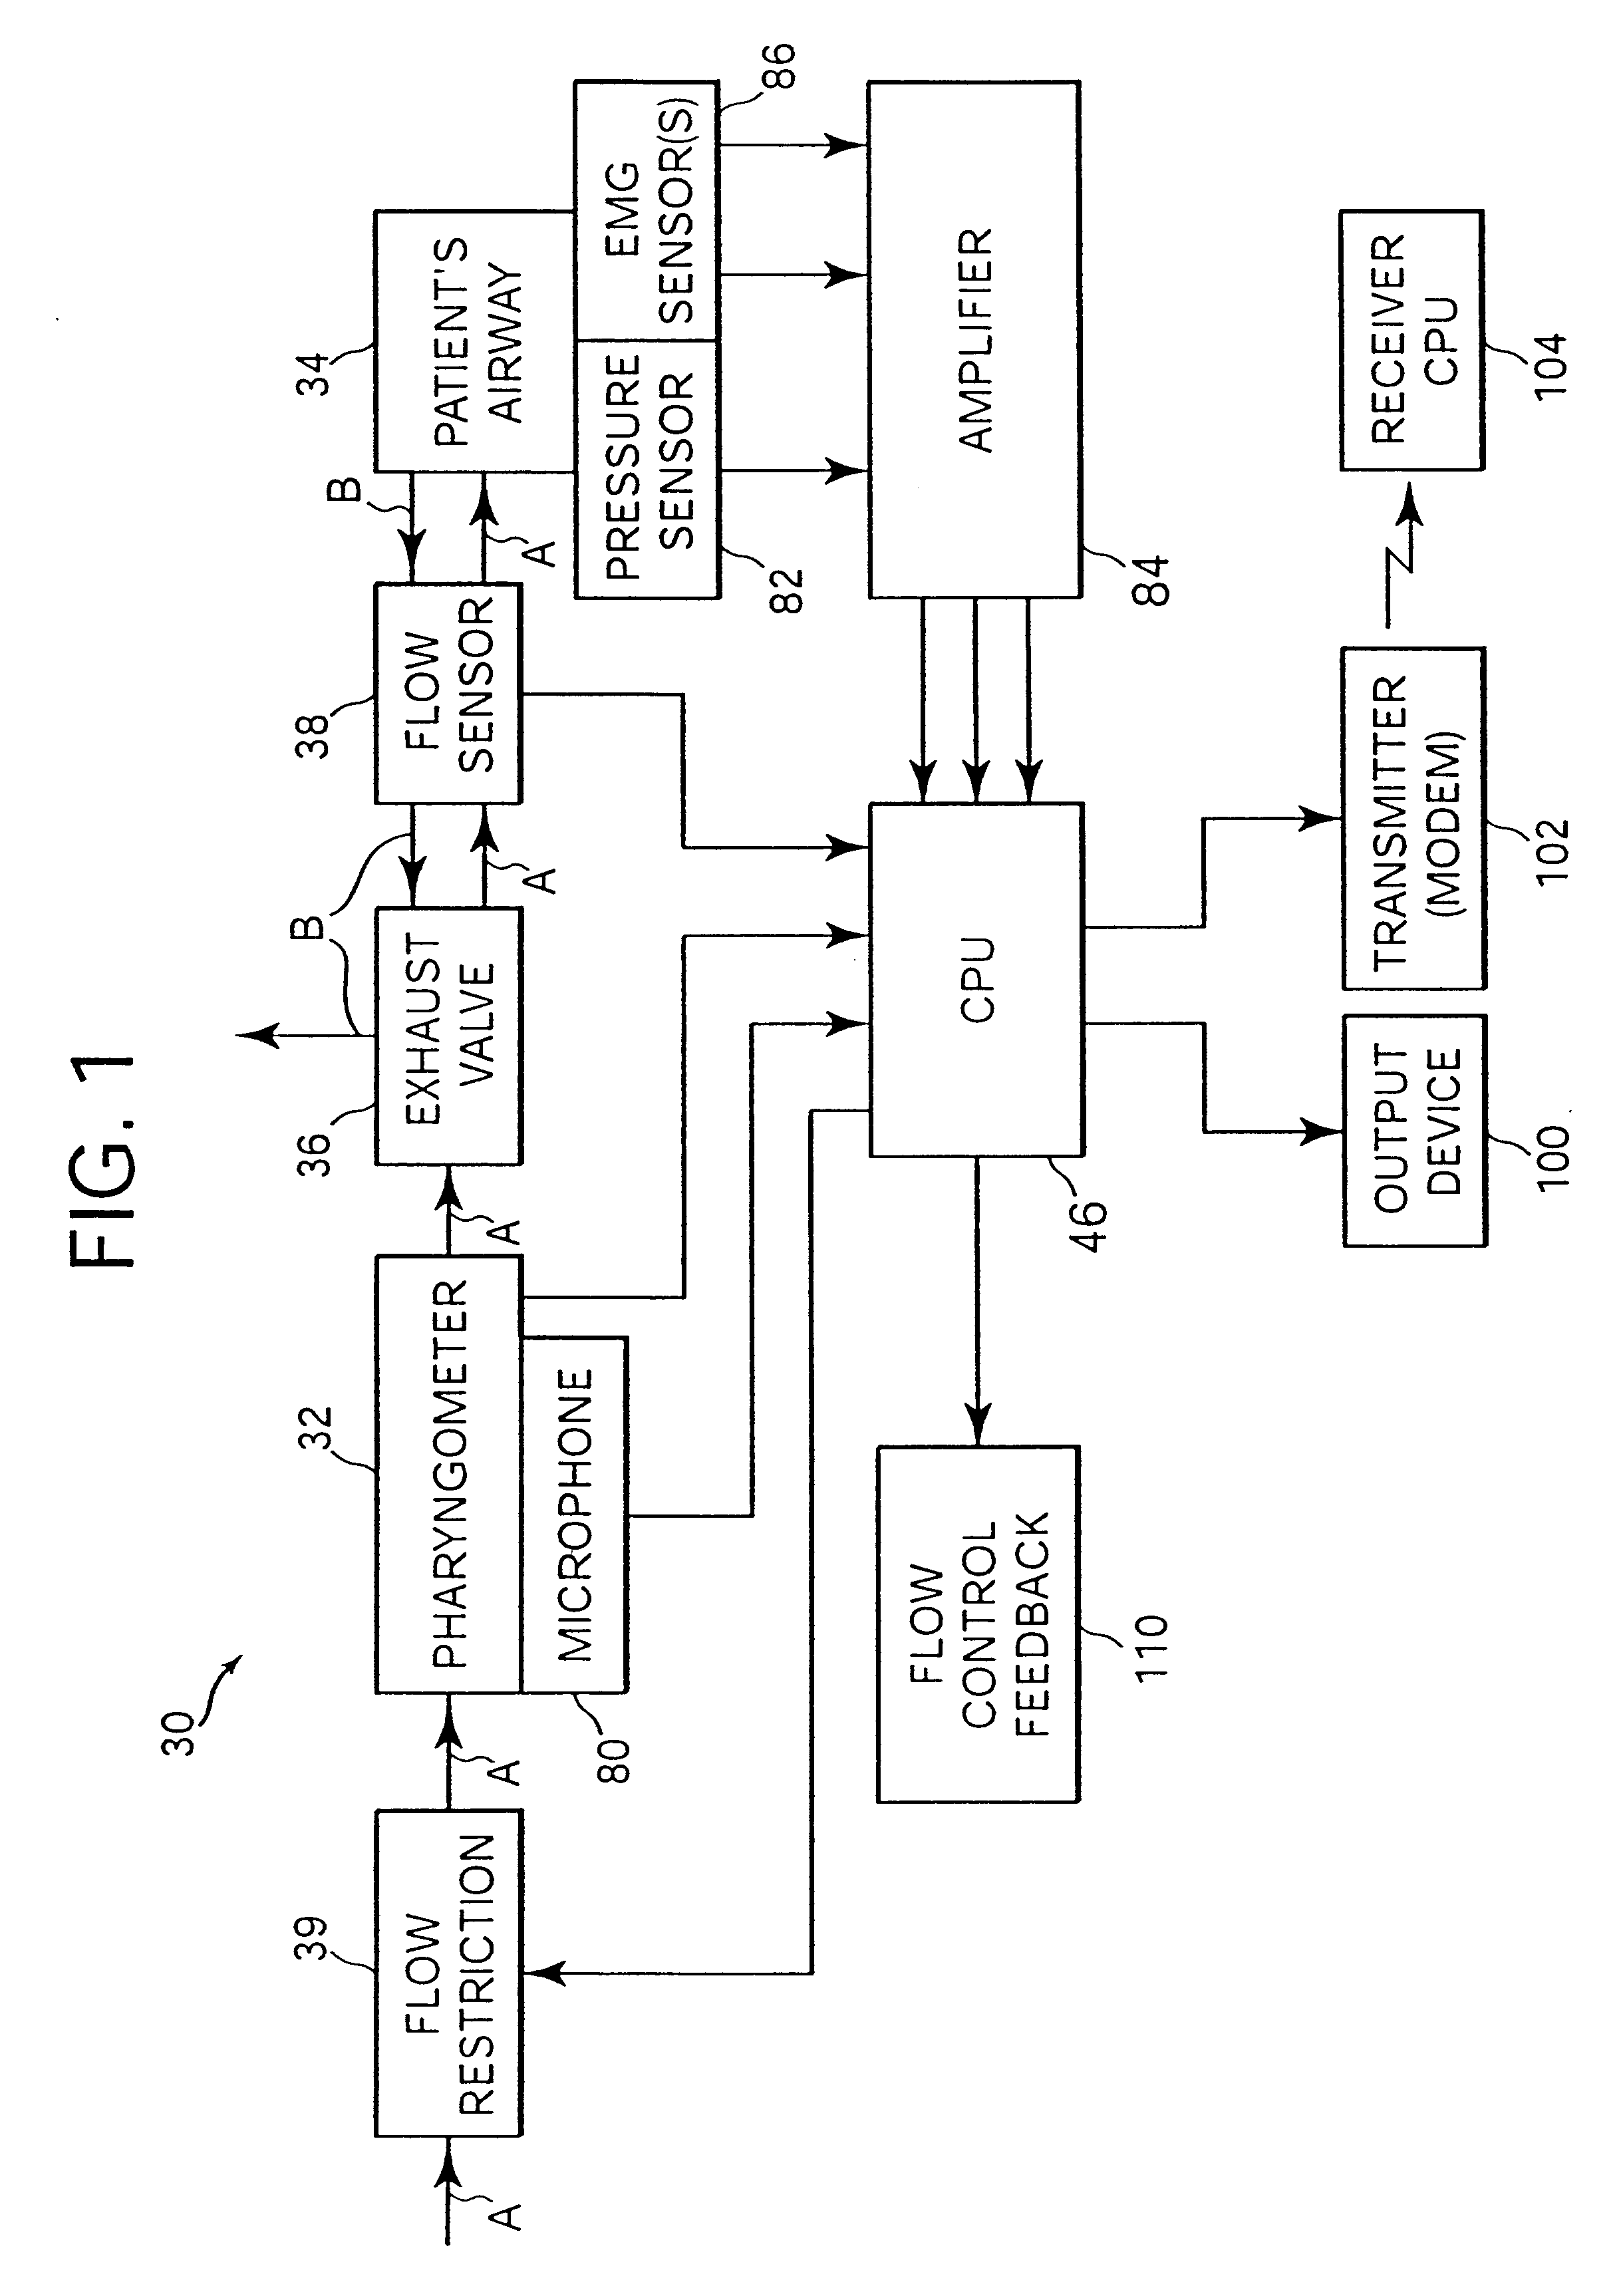 Breathing disorder prescreening device and method